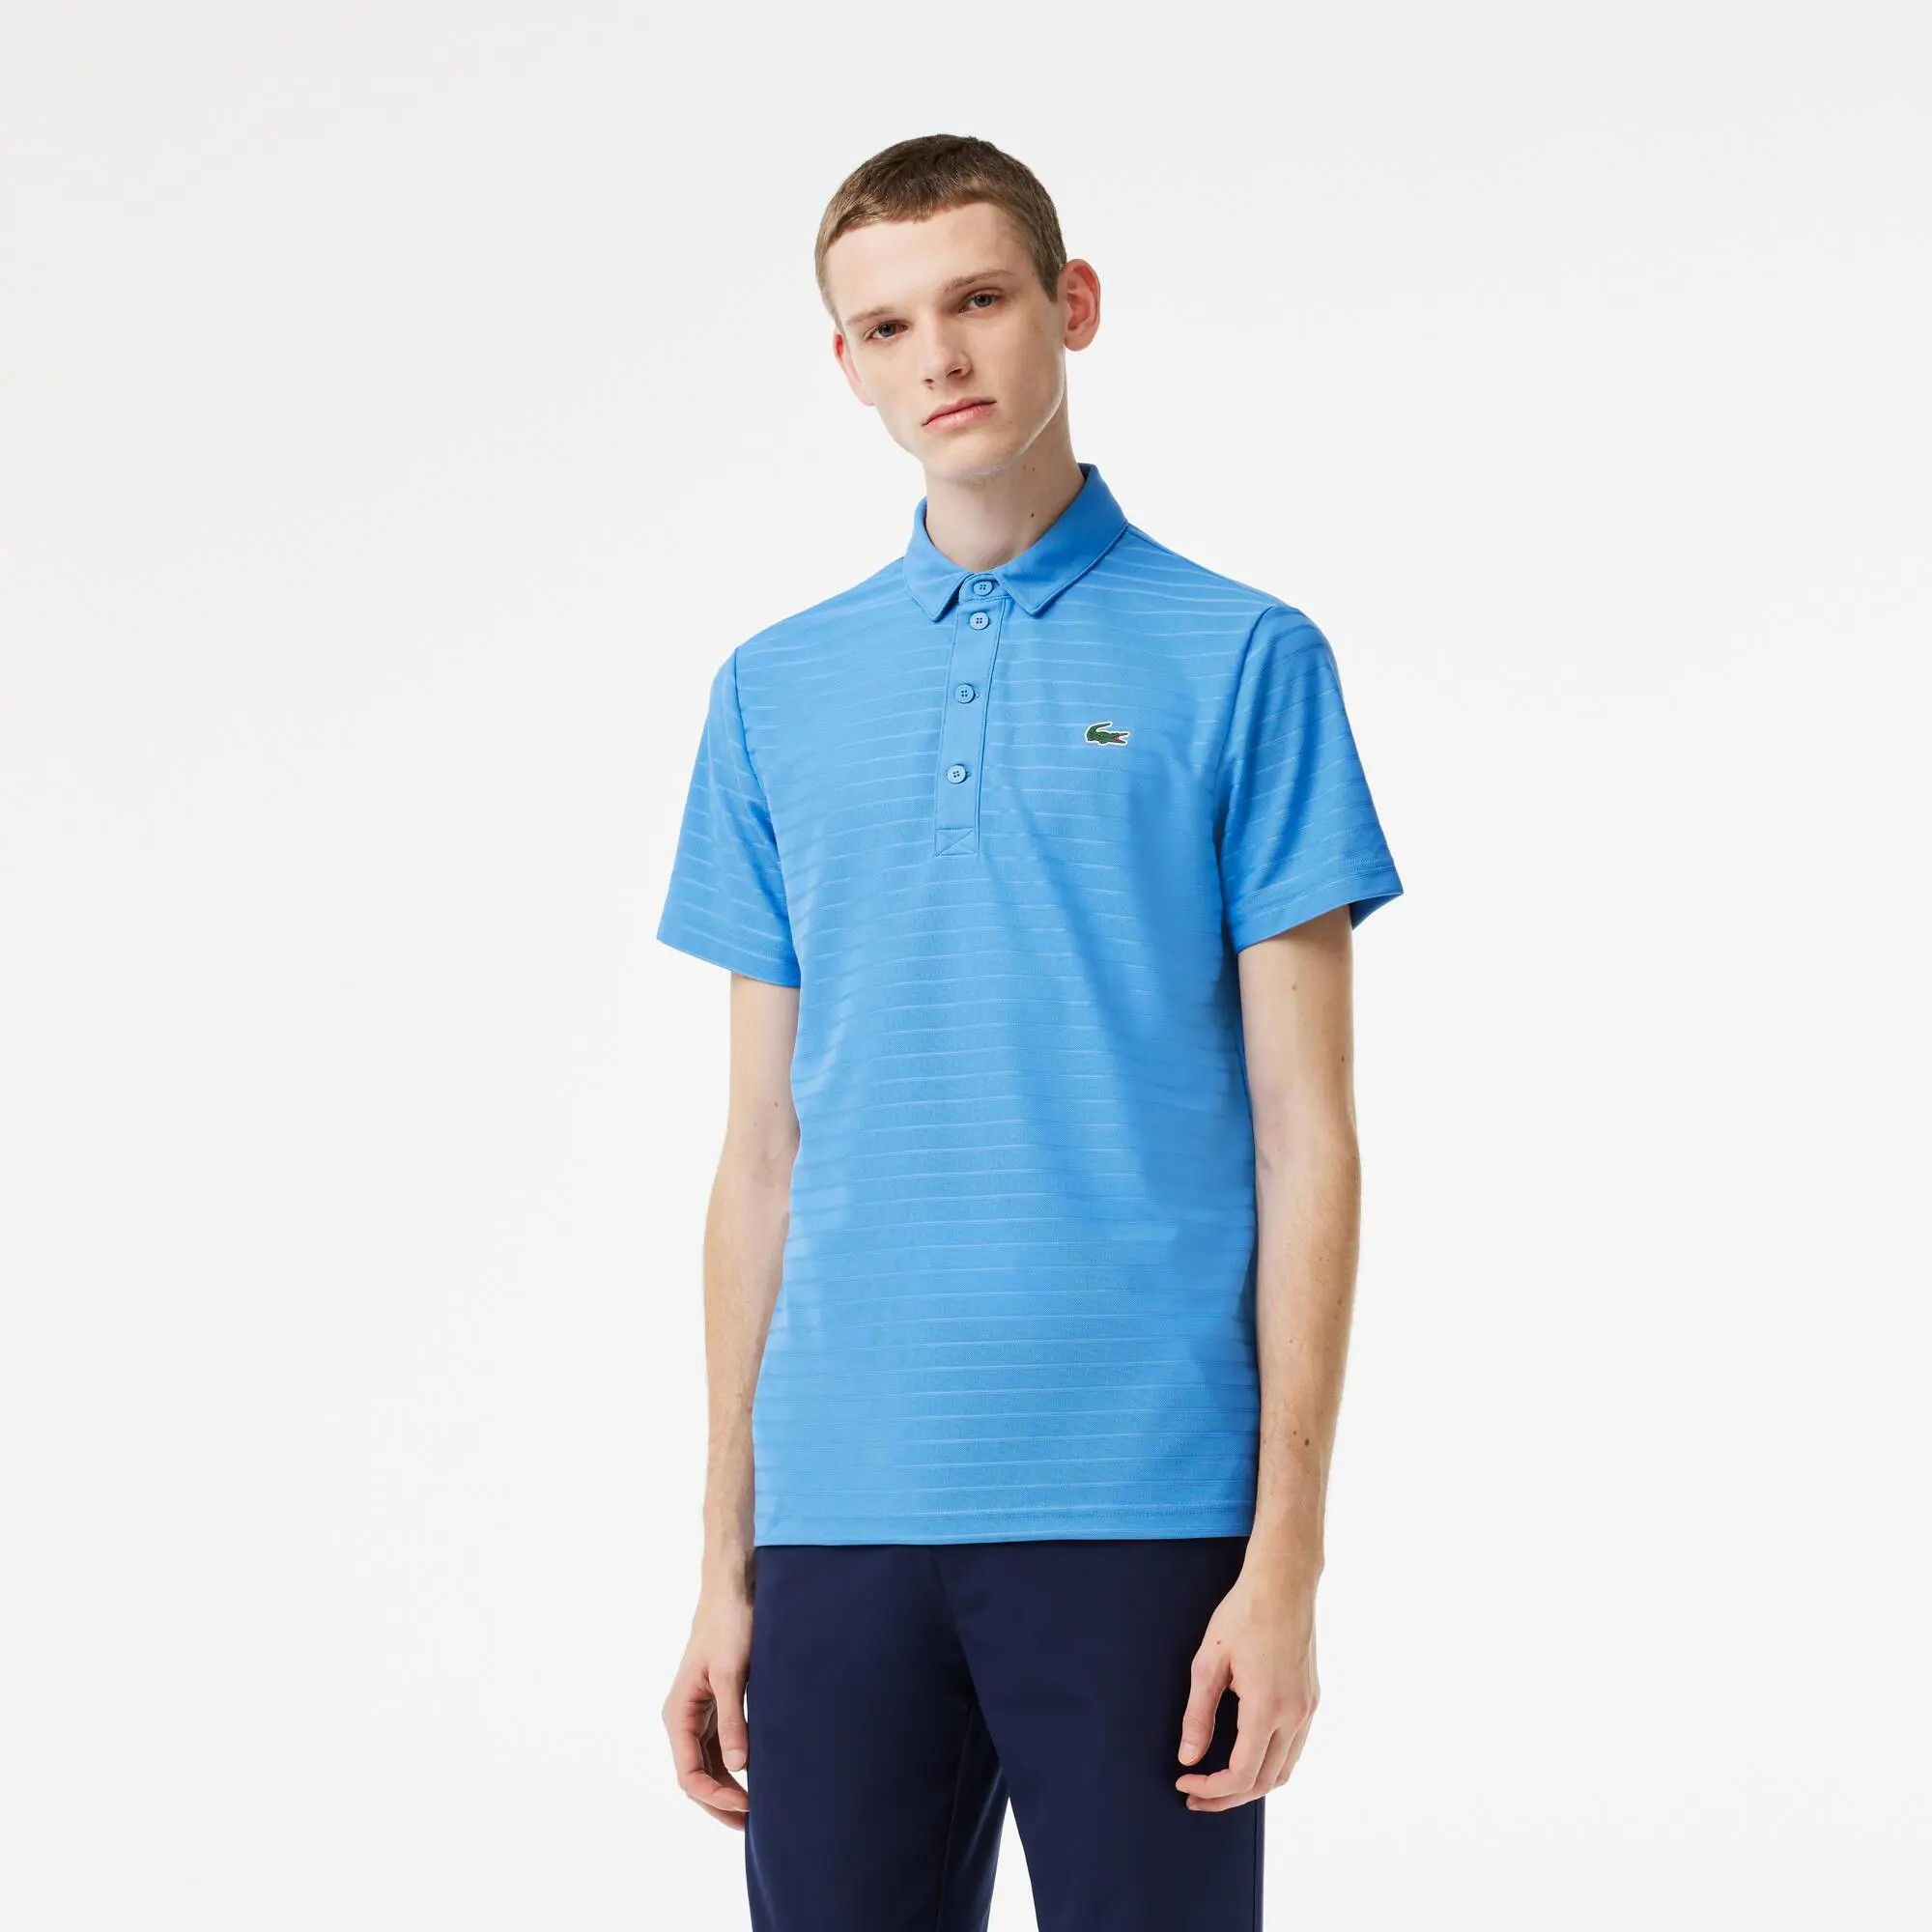 Lacoste Men's SPORT Textured Breathable Golf Polo. 1